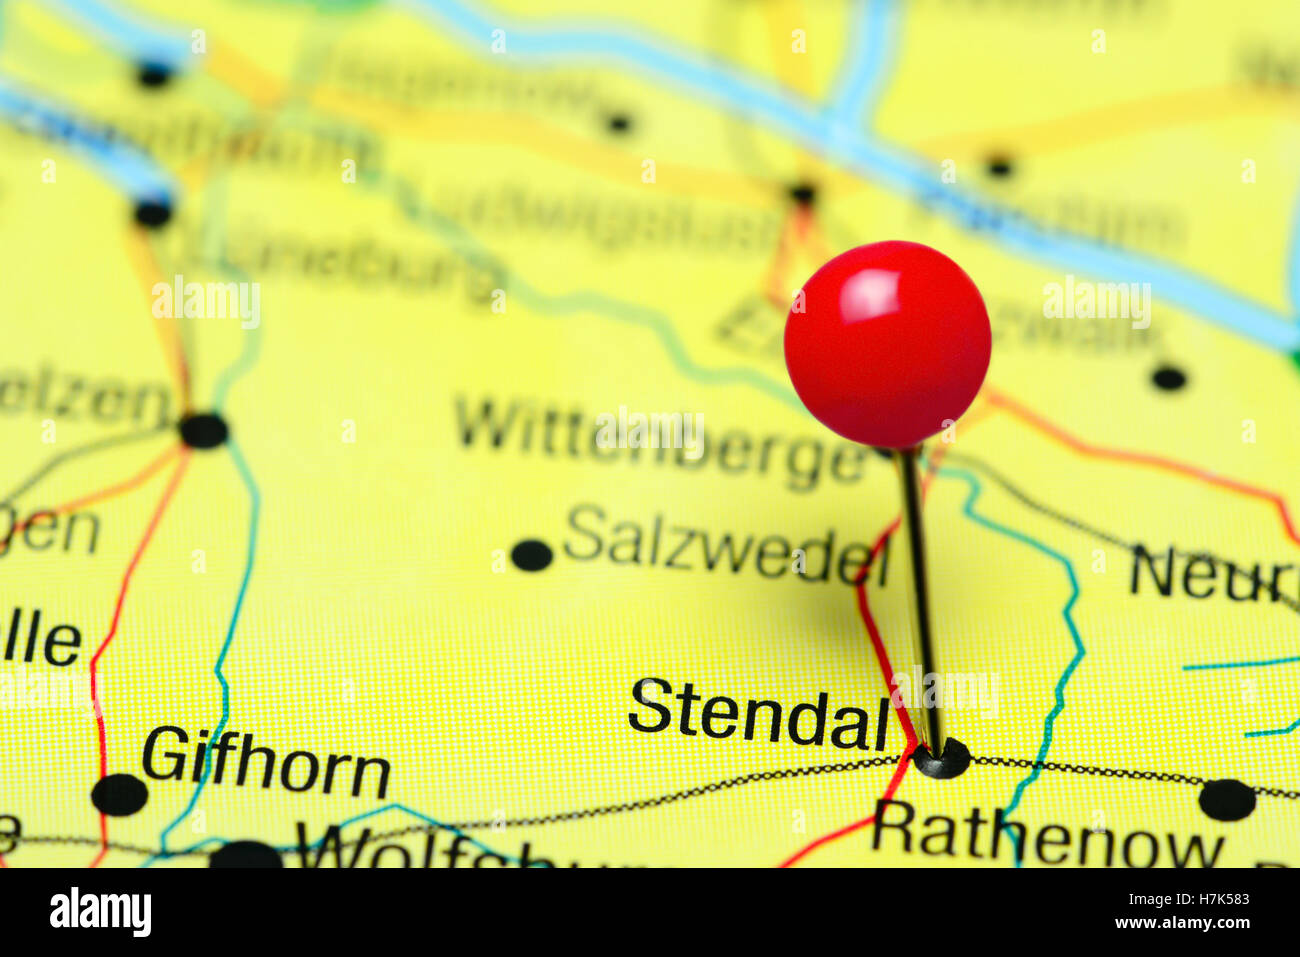 Stendal pinned on a map of Germany Stock Photo